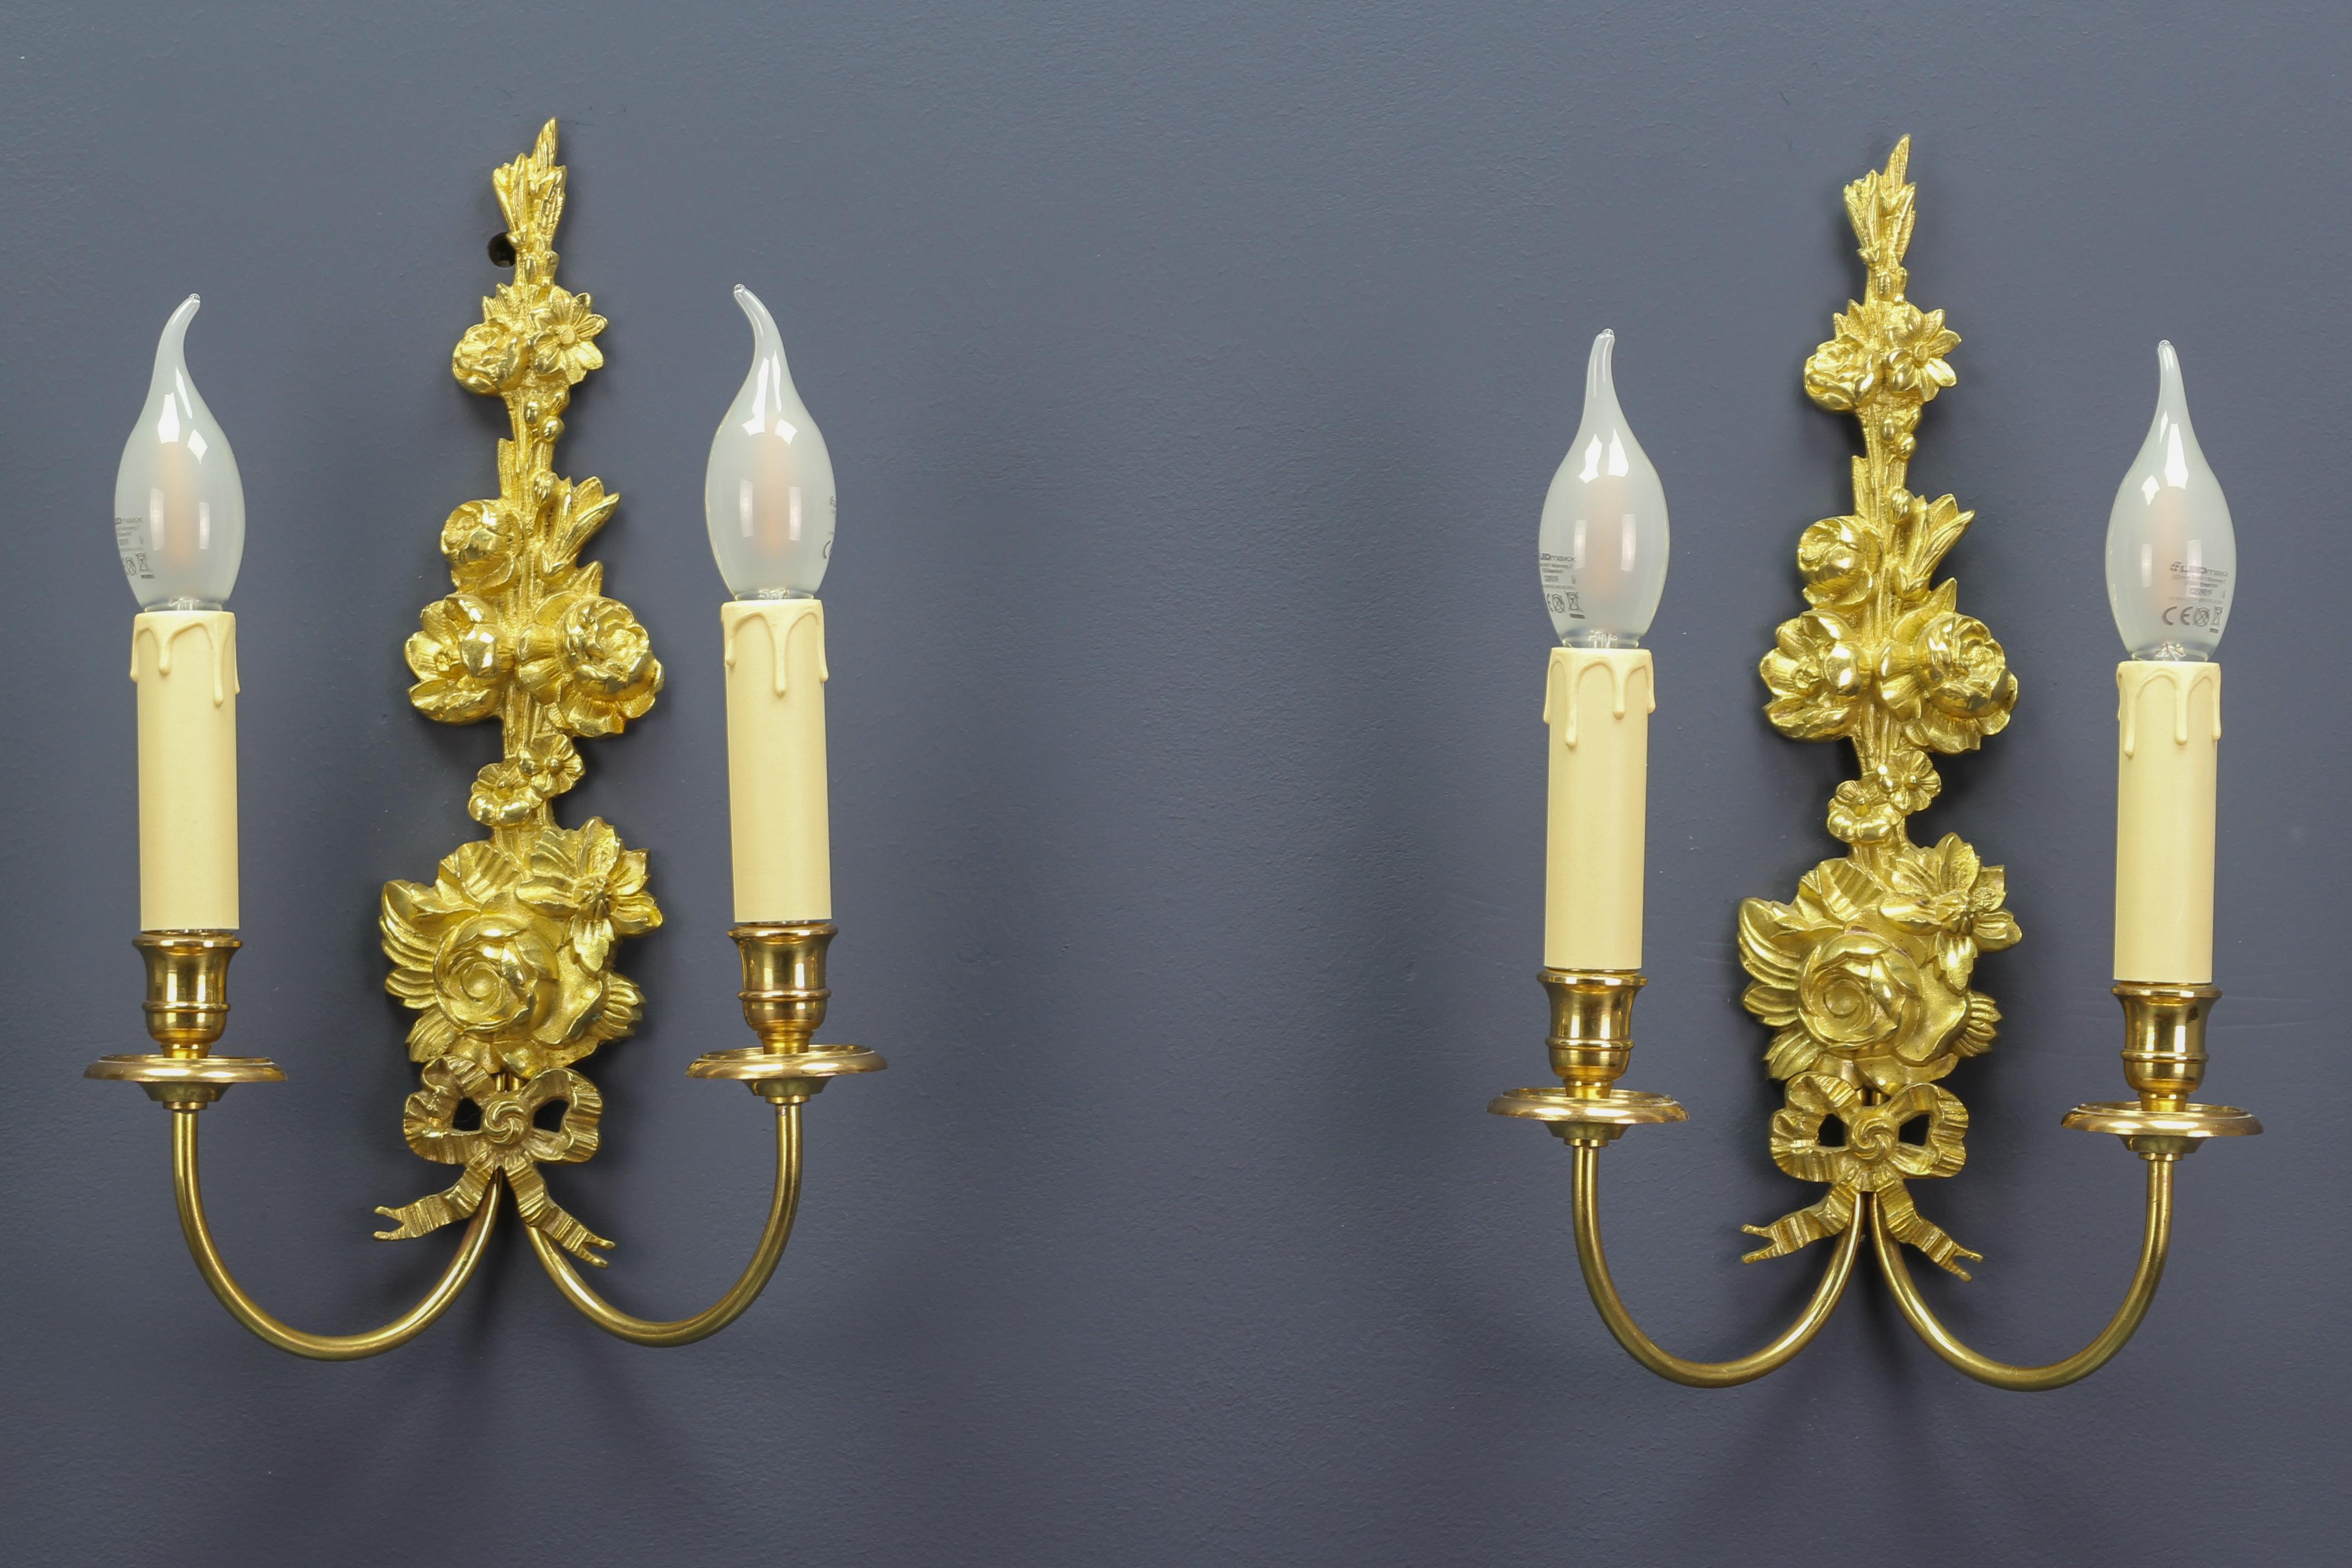 A pair of adorable French early 20th century Belle Époque style gilt bronze and brass sconces in a form of a beautifully shaped flower bouquet. The sconces are numbered on the backside.
Each sconce has two arms and each arm has a socket for an E 14